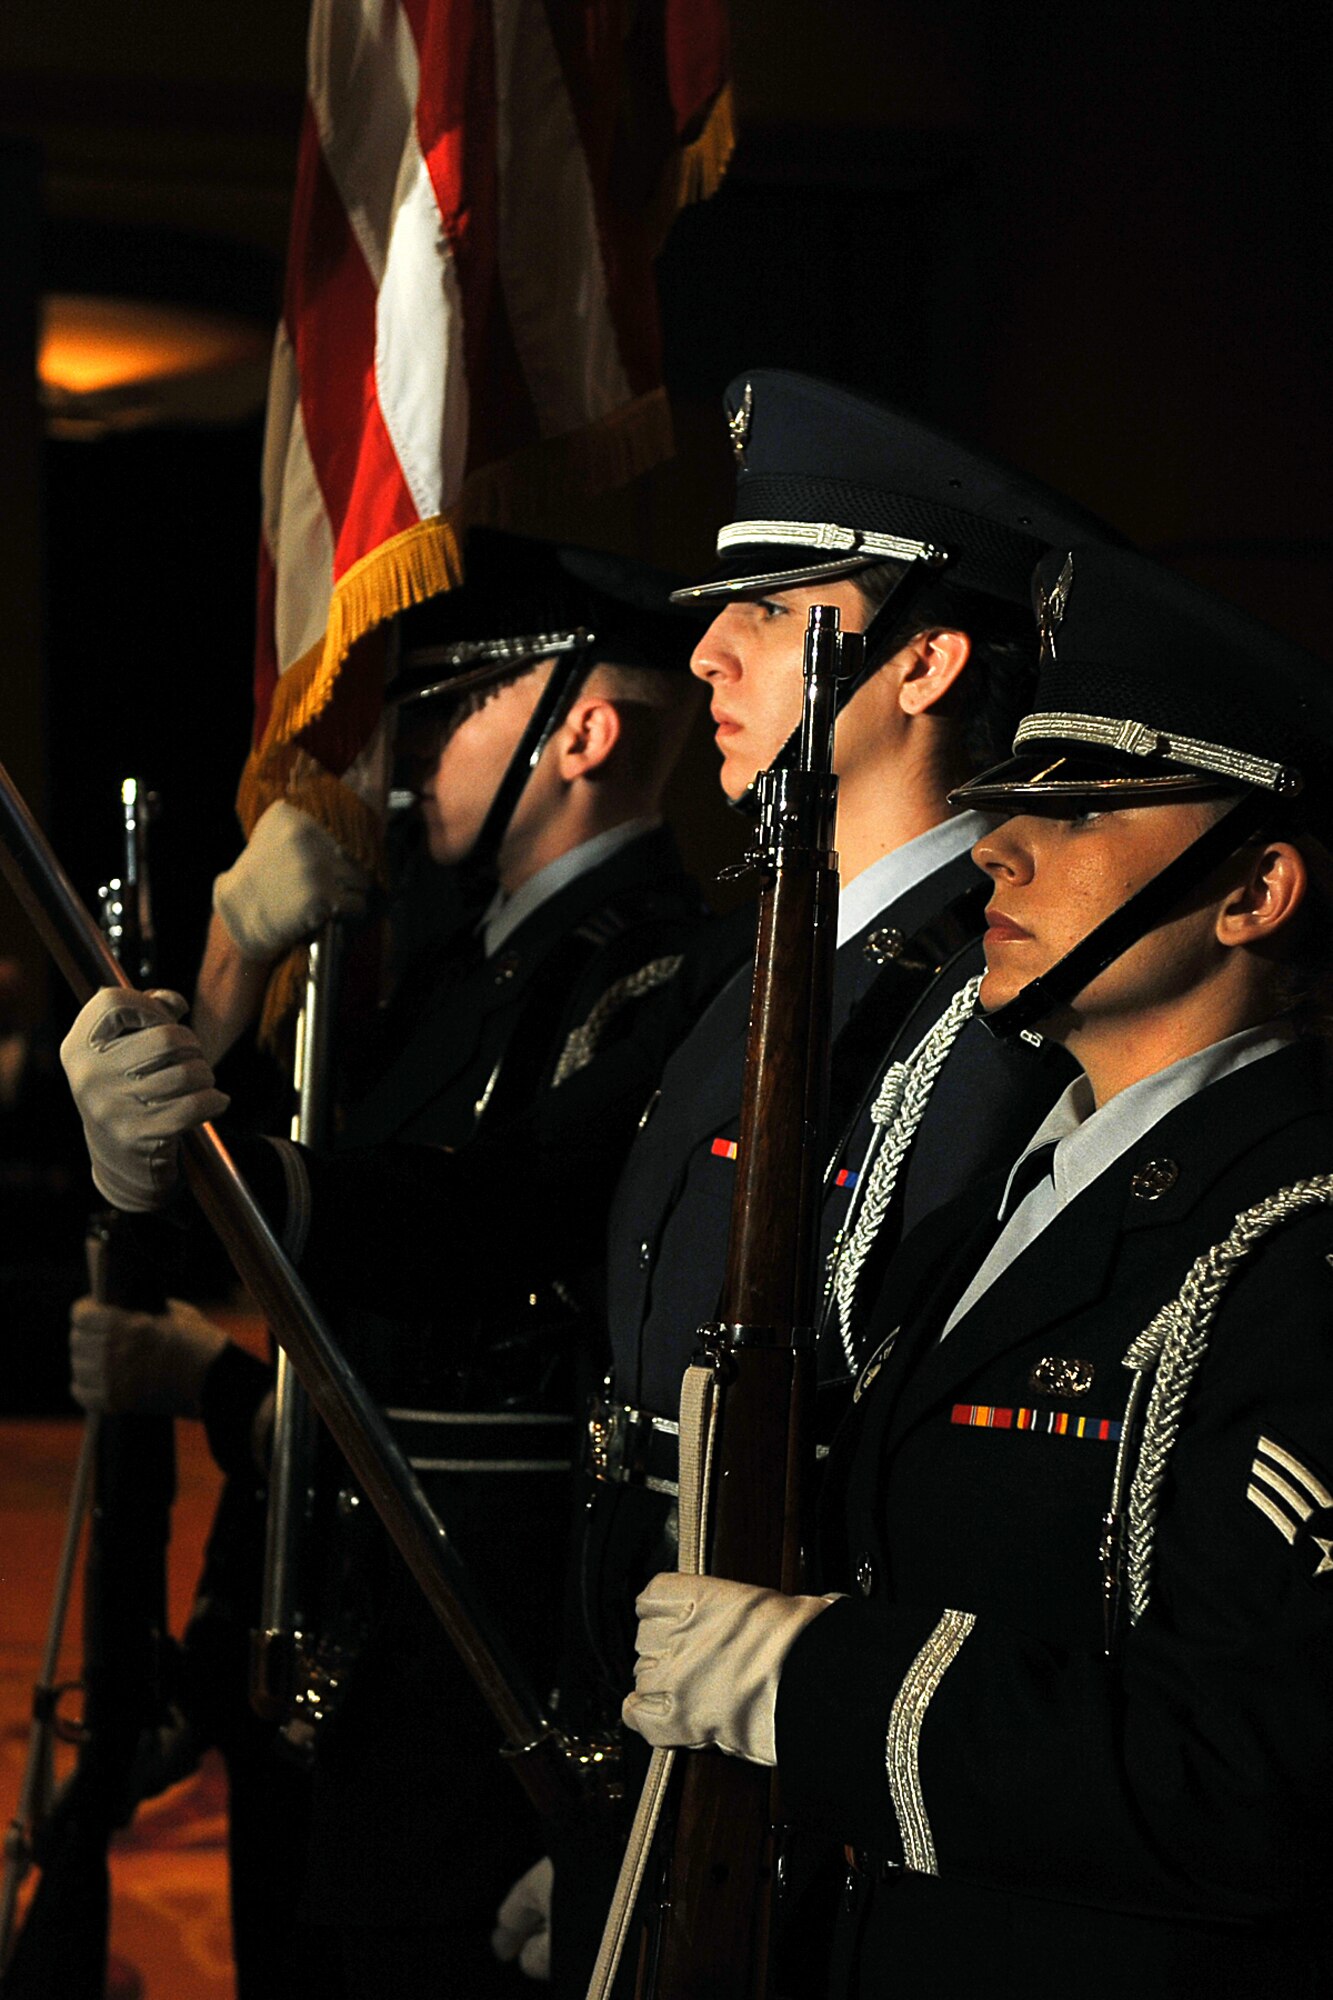 OFFUTT AIR FORCE BASE, Neb. -- Honor Guard members from various bases across Air Combat Command present the colors during the singing of the national anthem at ACC's Outstanding Airmen of the Year banquet at the Embassy Suites hotel in La Vista, Neb., April 21. More than 200 people attended the ceremony to honor the command's best Airmen for their dedication, sacrifice and service. U.S. Air Force photo by Charles Haymond